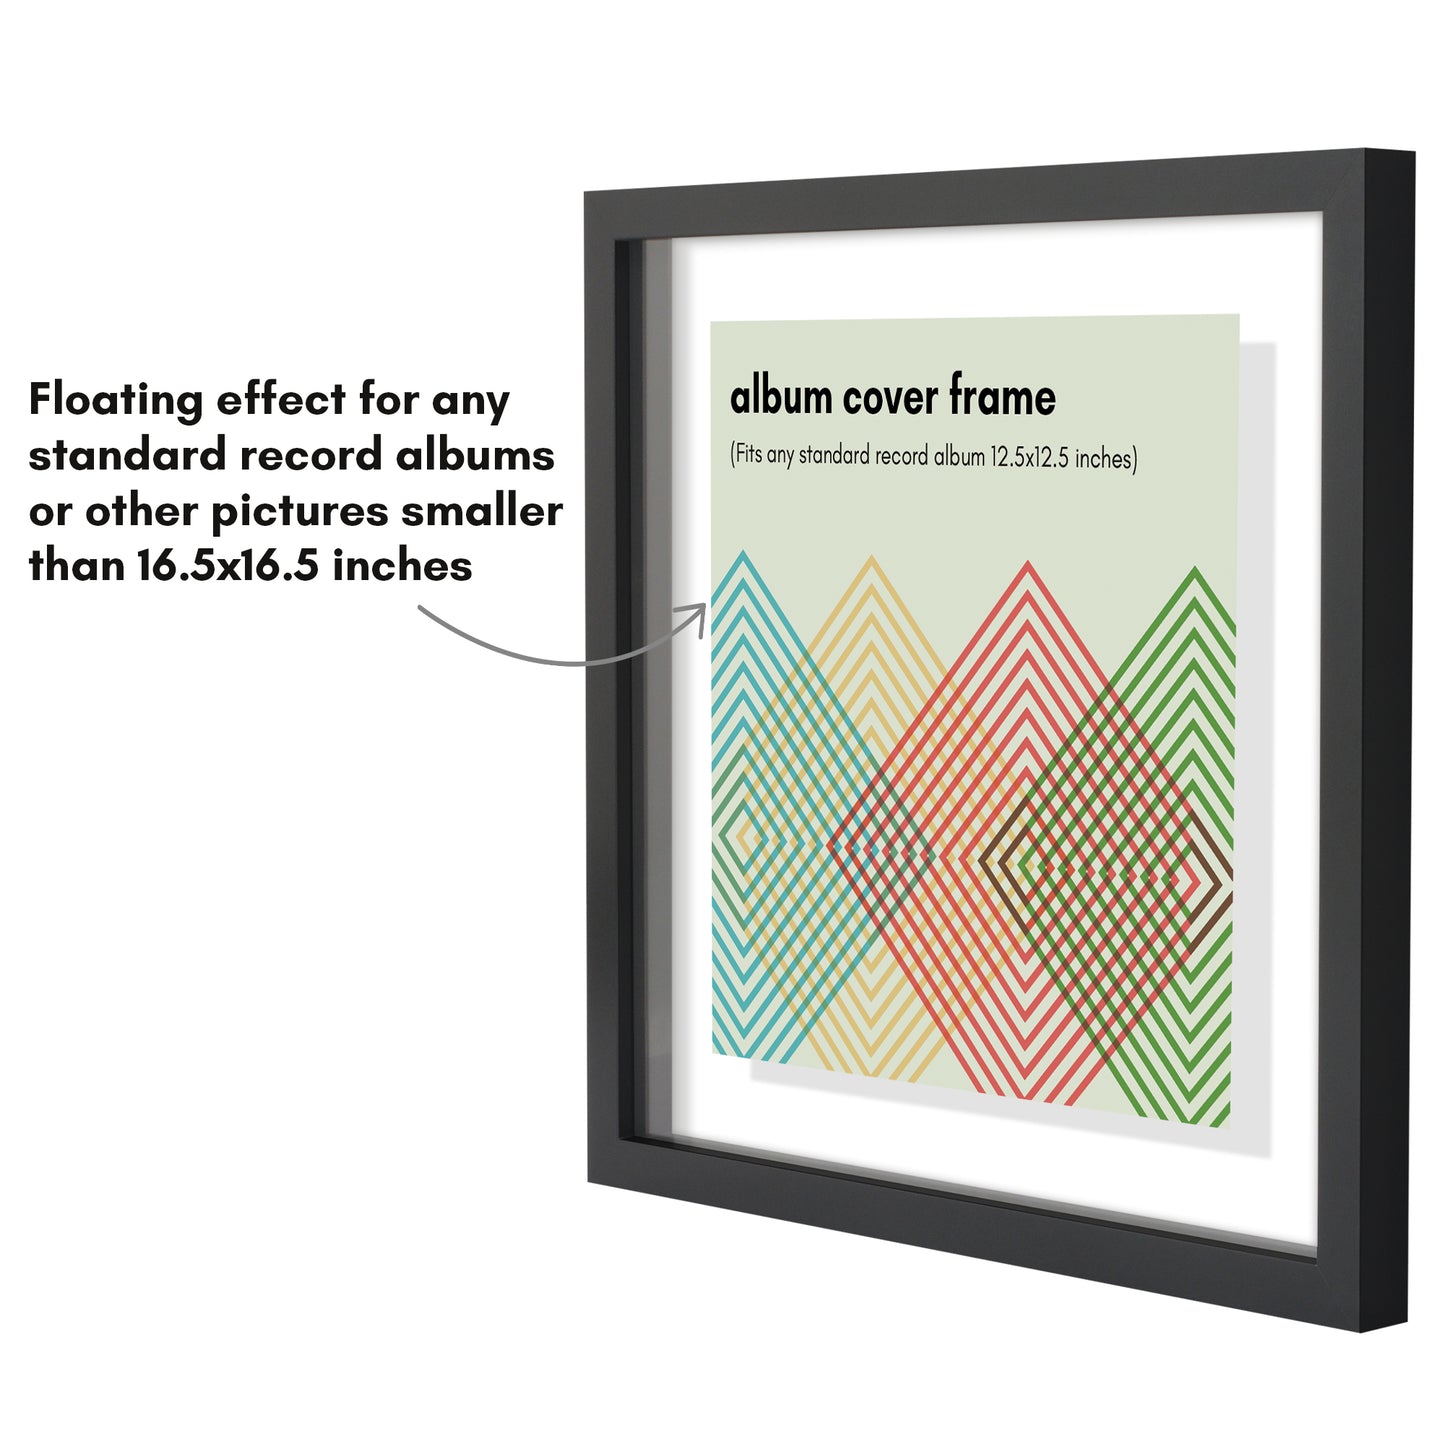 Americanflat 16.5 x 16.5 Floating Album Frame to Display Record Covers - Black